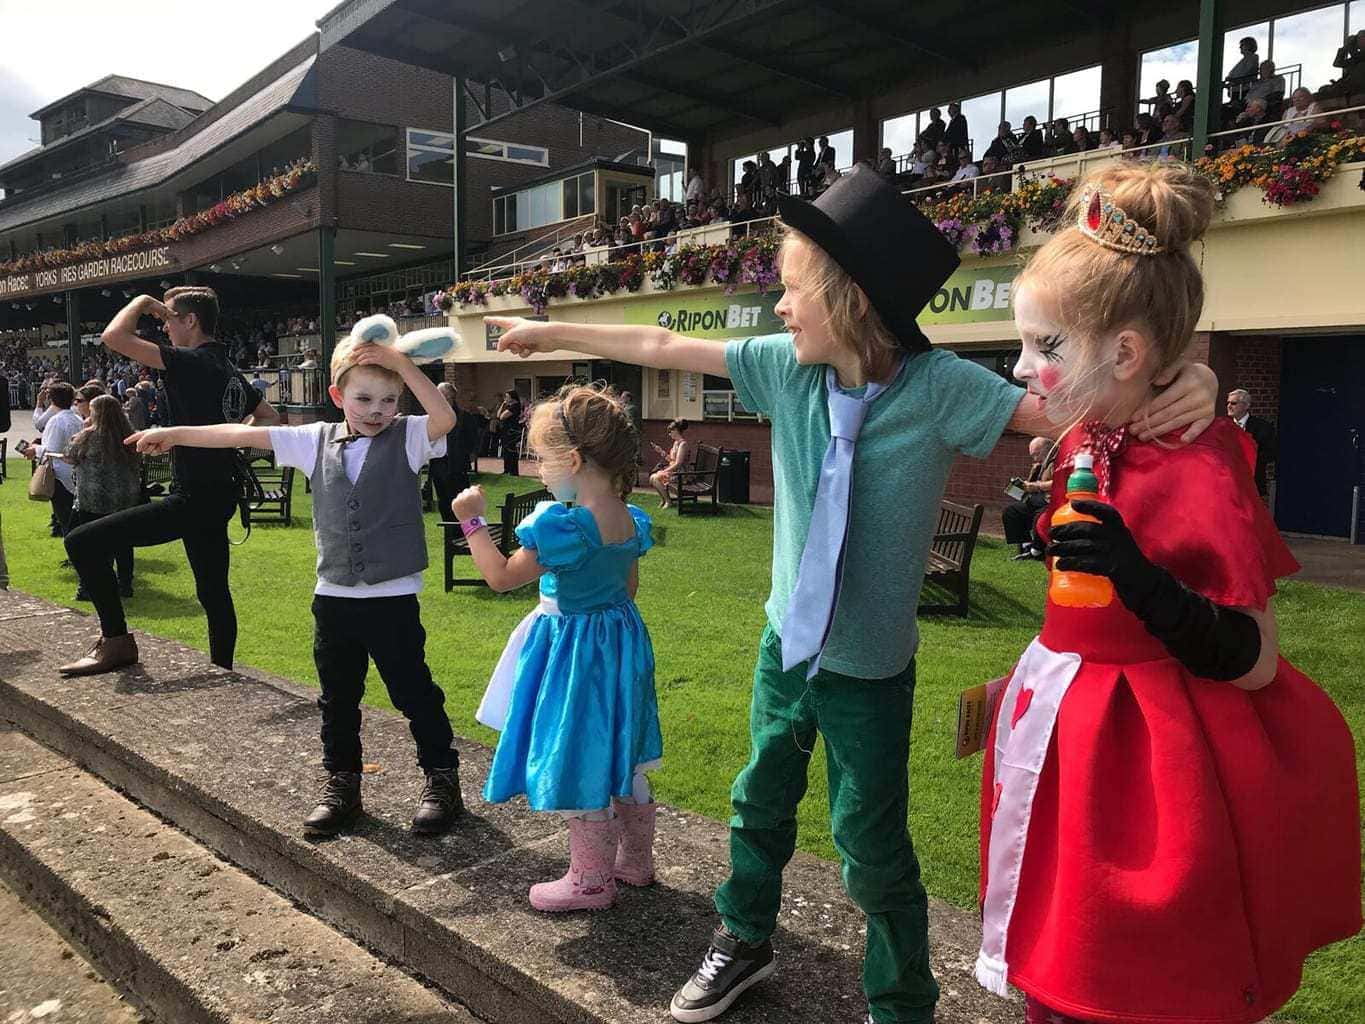 Family Day at the Races | Taking the kids to the Races?